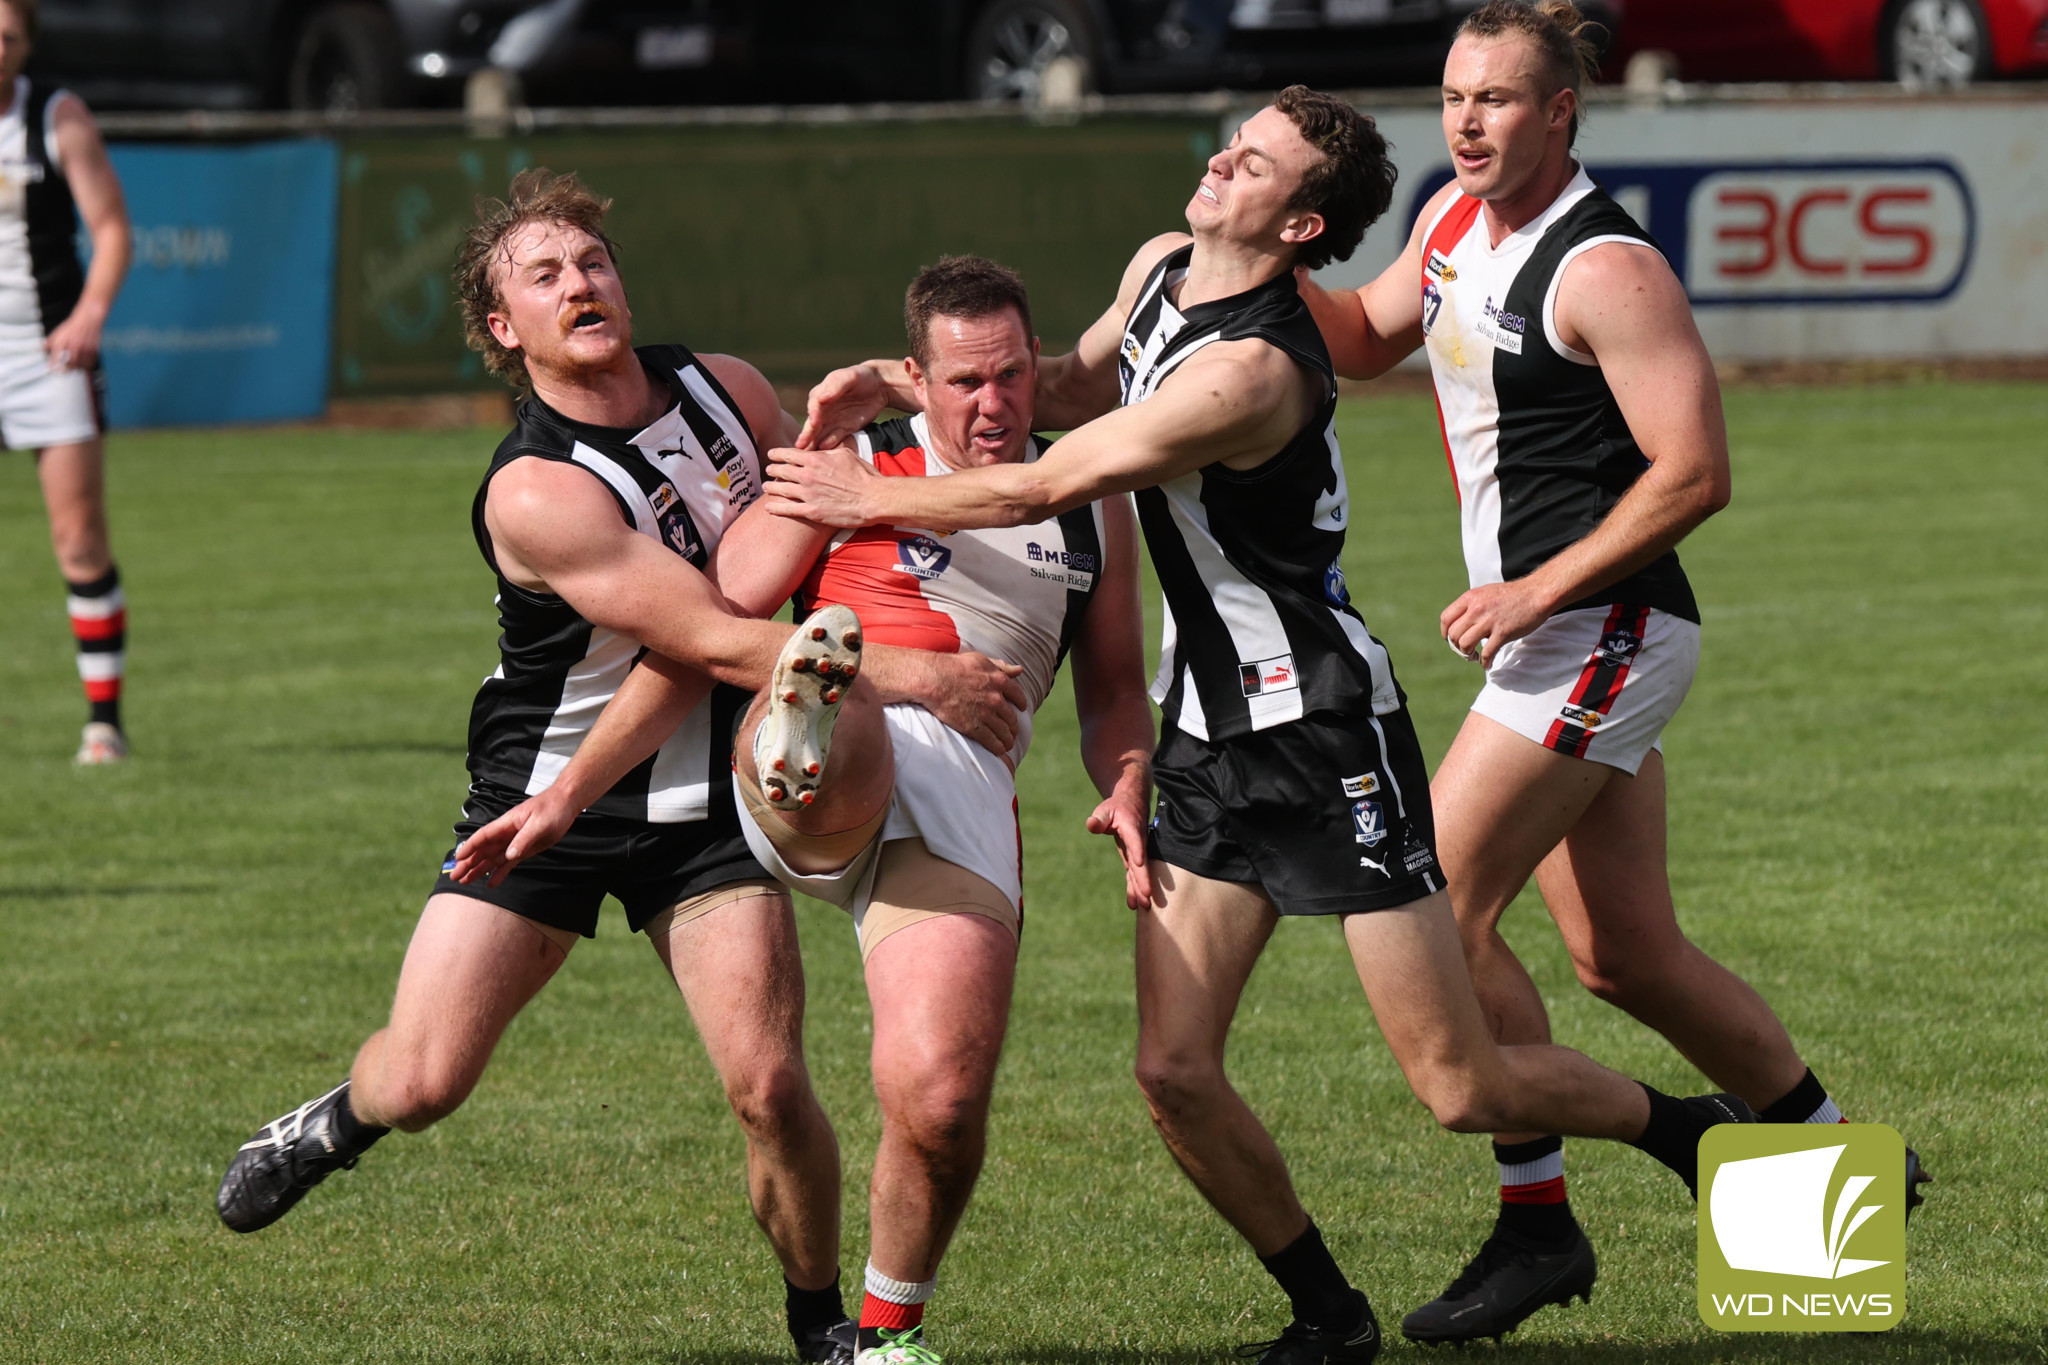 First win for reserves - feature photo